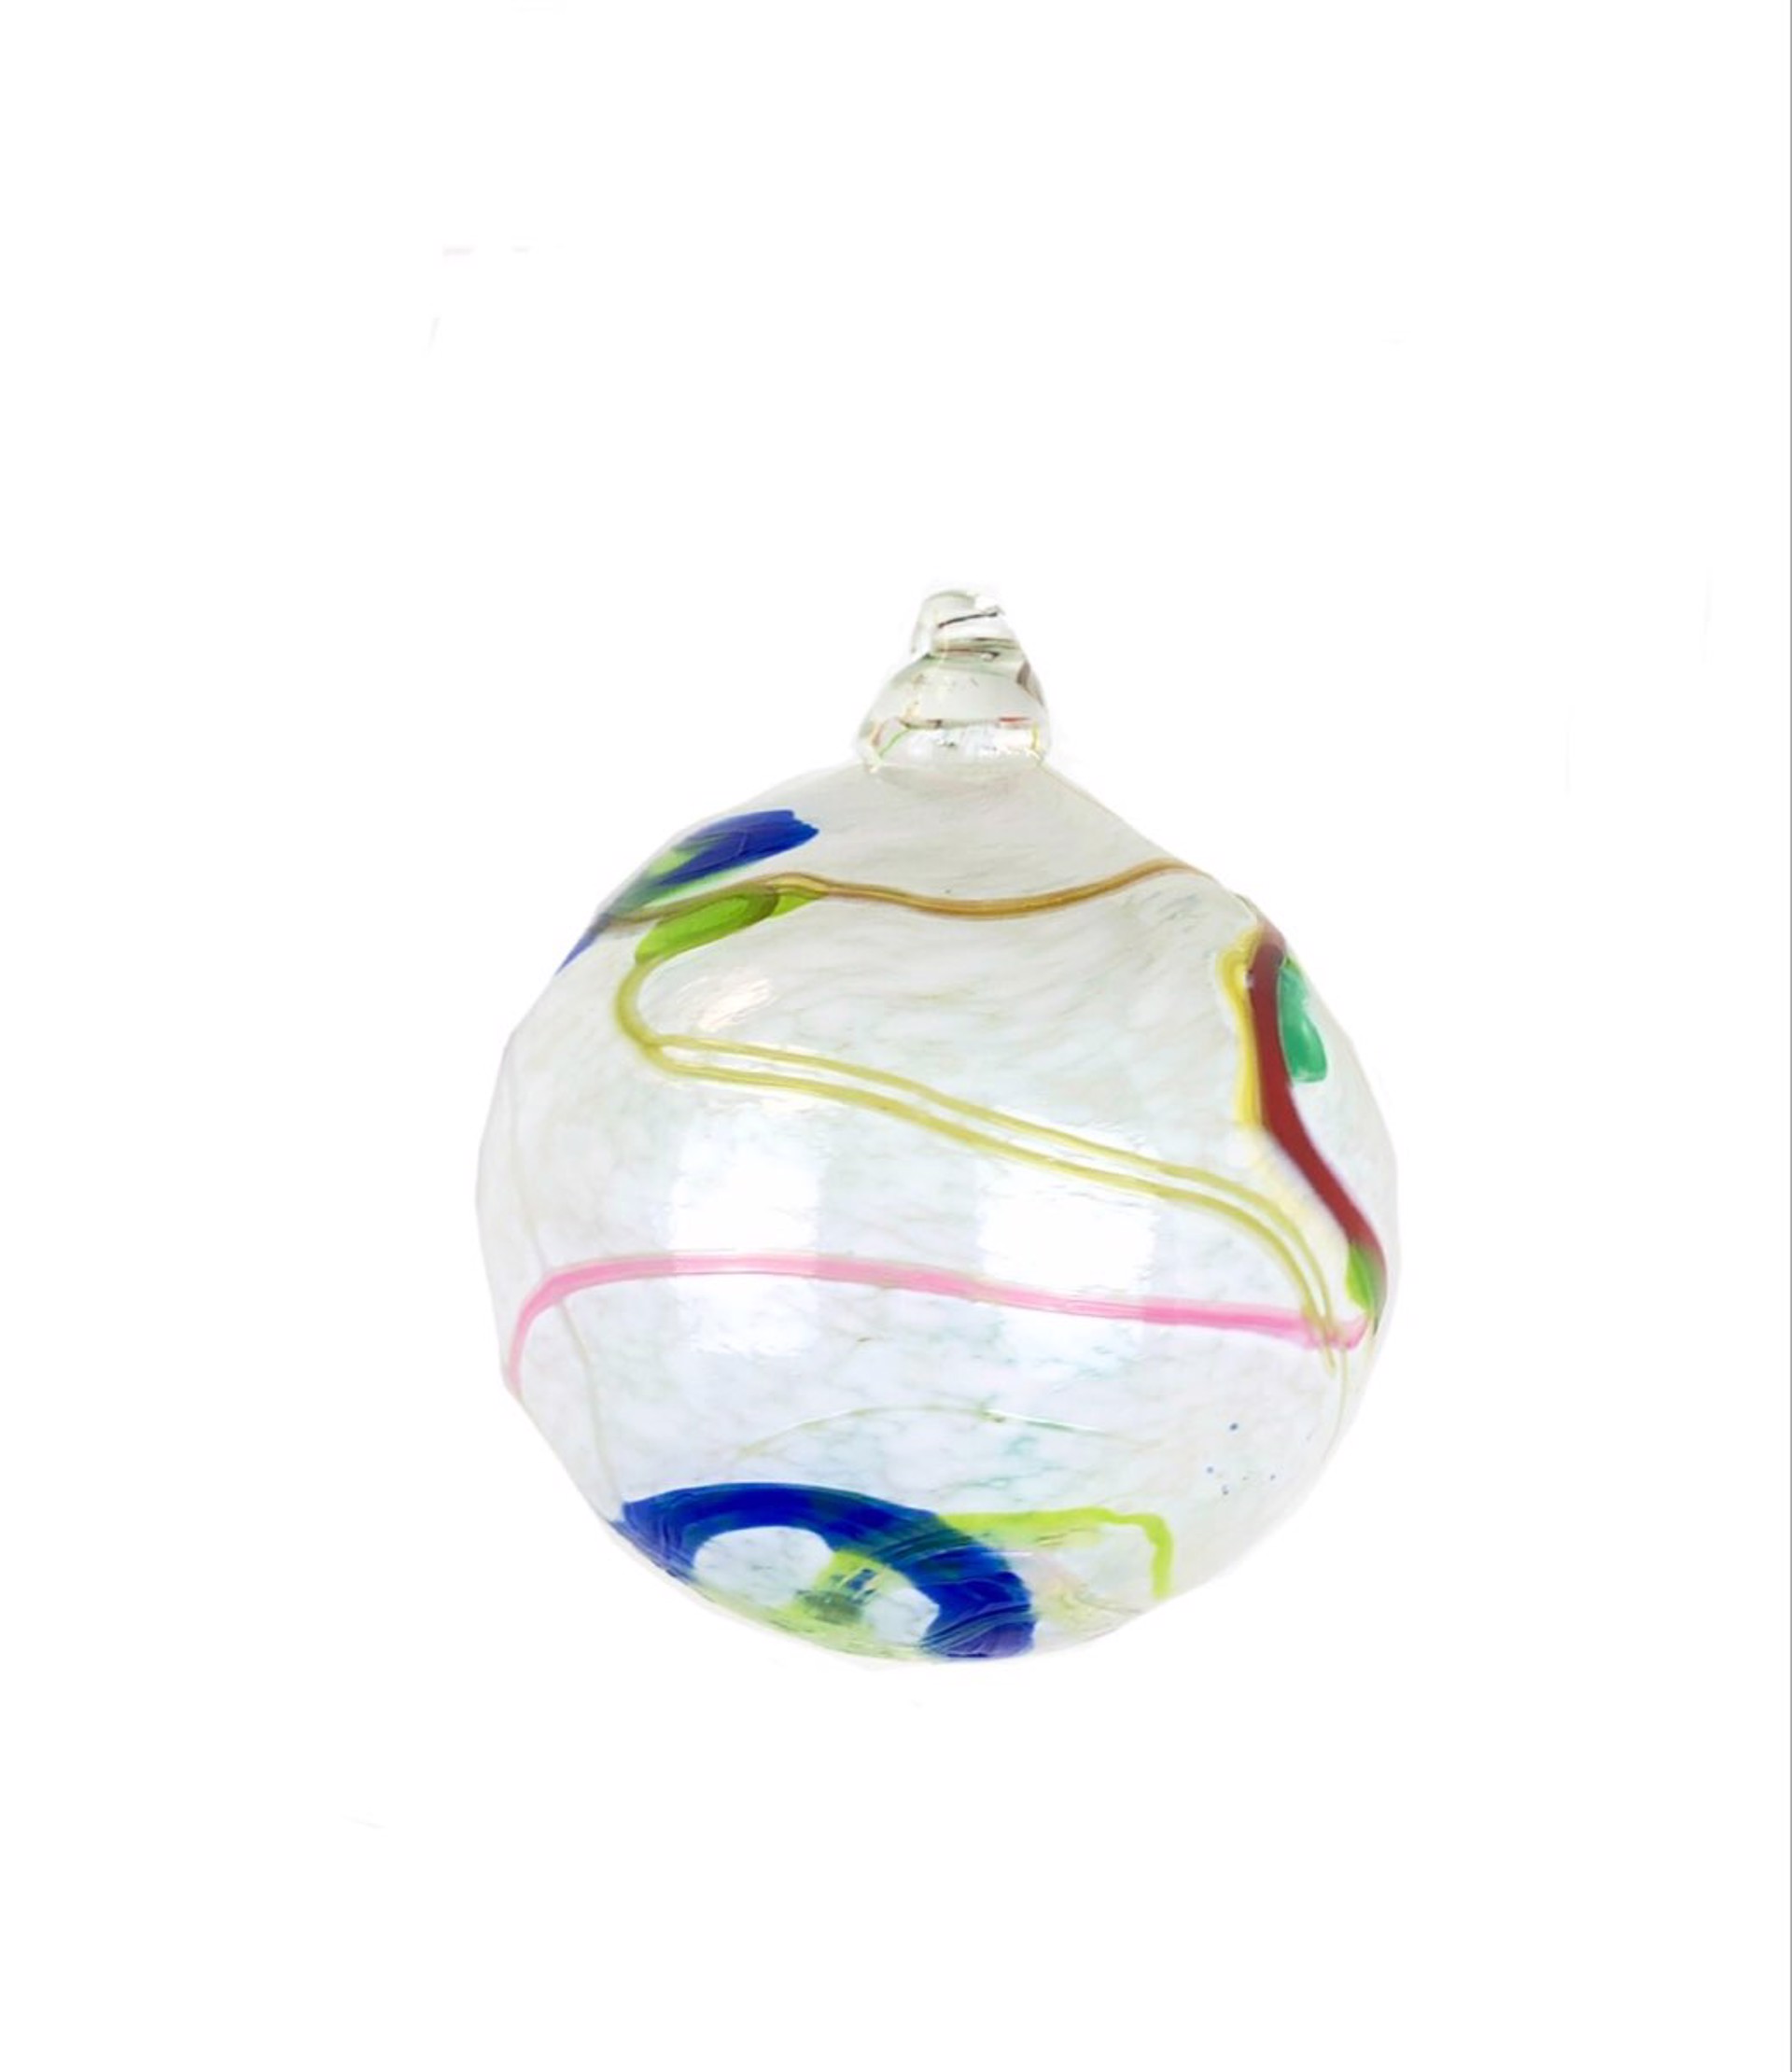 Ornament by Chad Balster